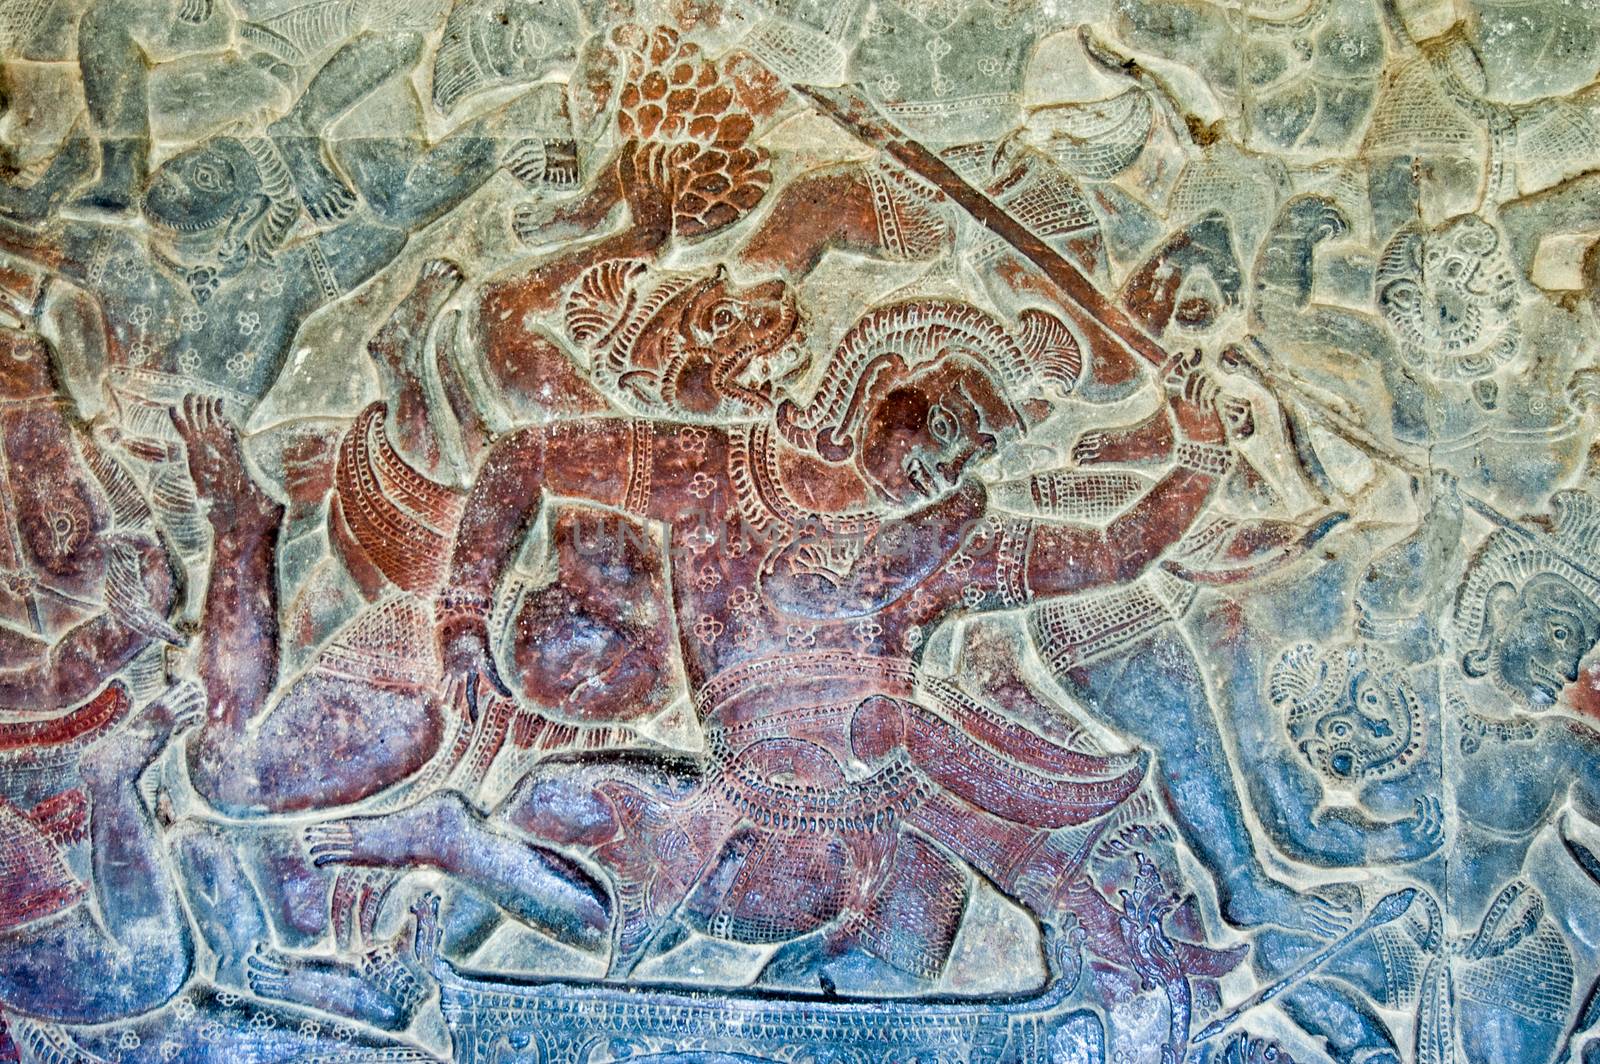 Bas relief showing a scene from the Battle of Lanka between Rama and Ravana as described in the epic Ramayana. A monkey soldier is fighting a demon. Wall of Angkor Wat Temple, Angkor, Cambodia.